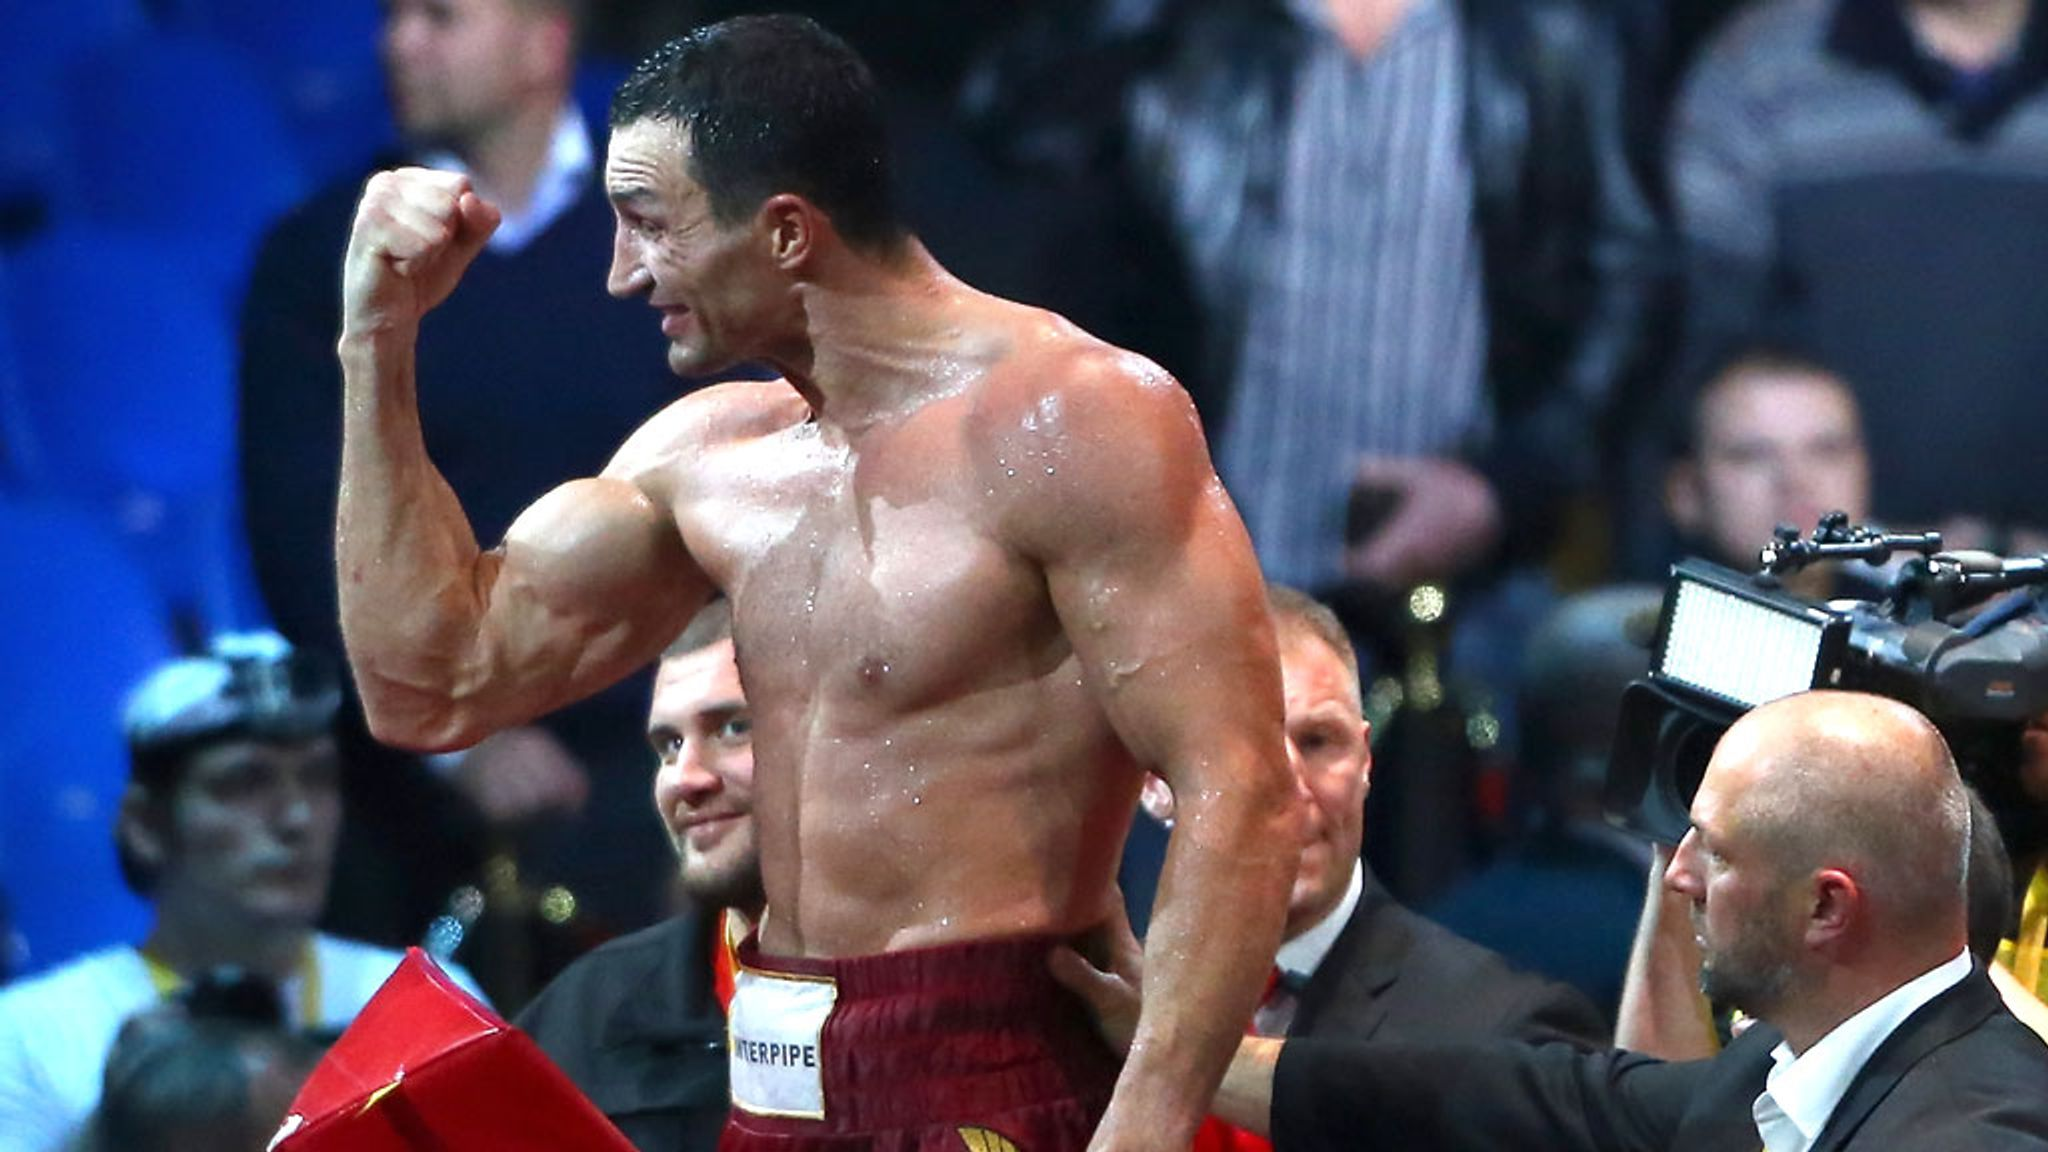 Wladimir Klitschko fought for the IBF, vacant WBA (Super) and IBO heavyweight titles at 41